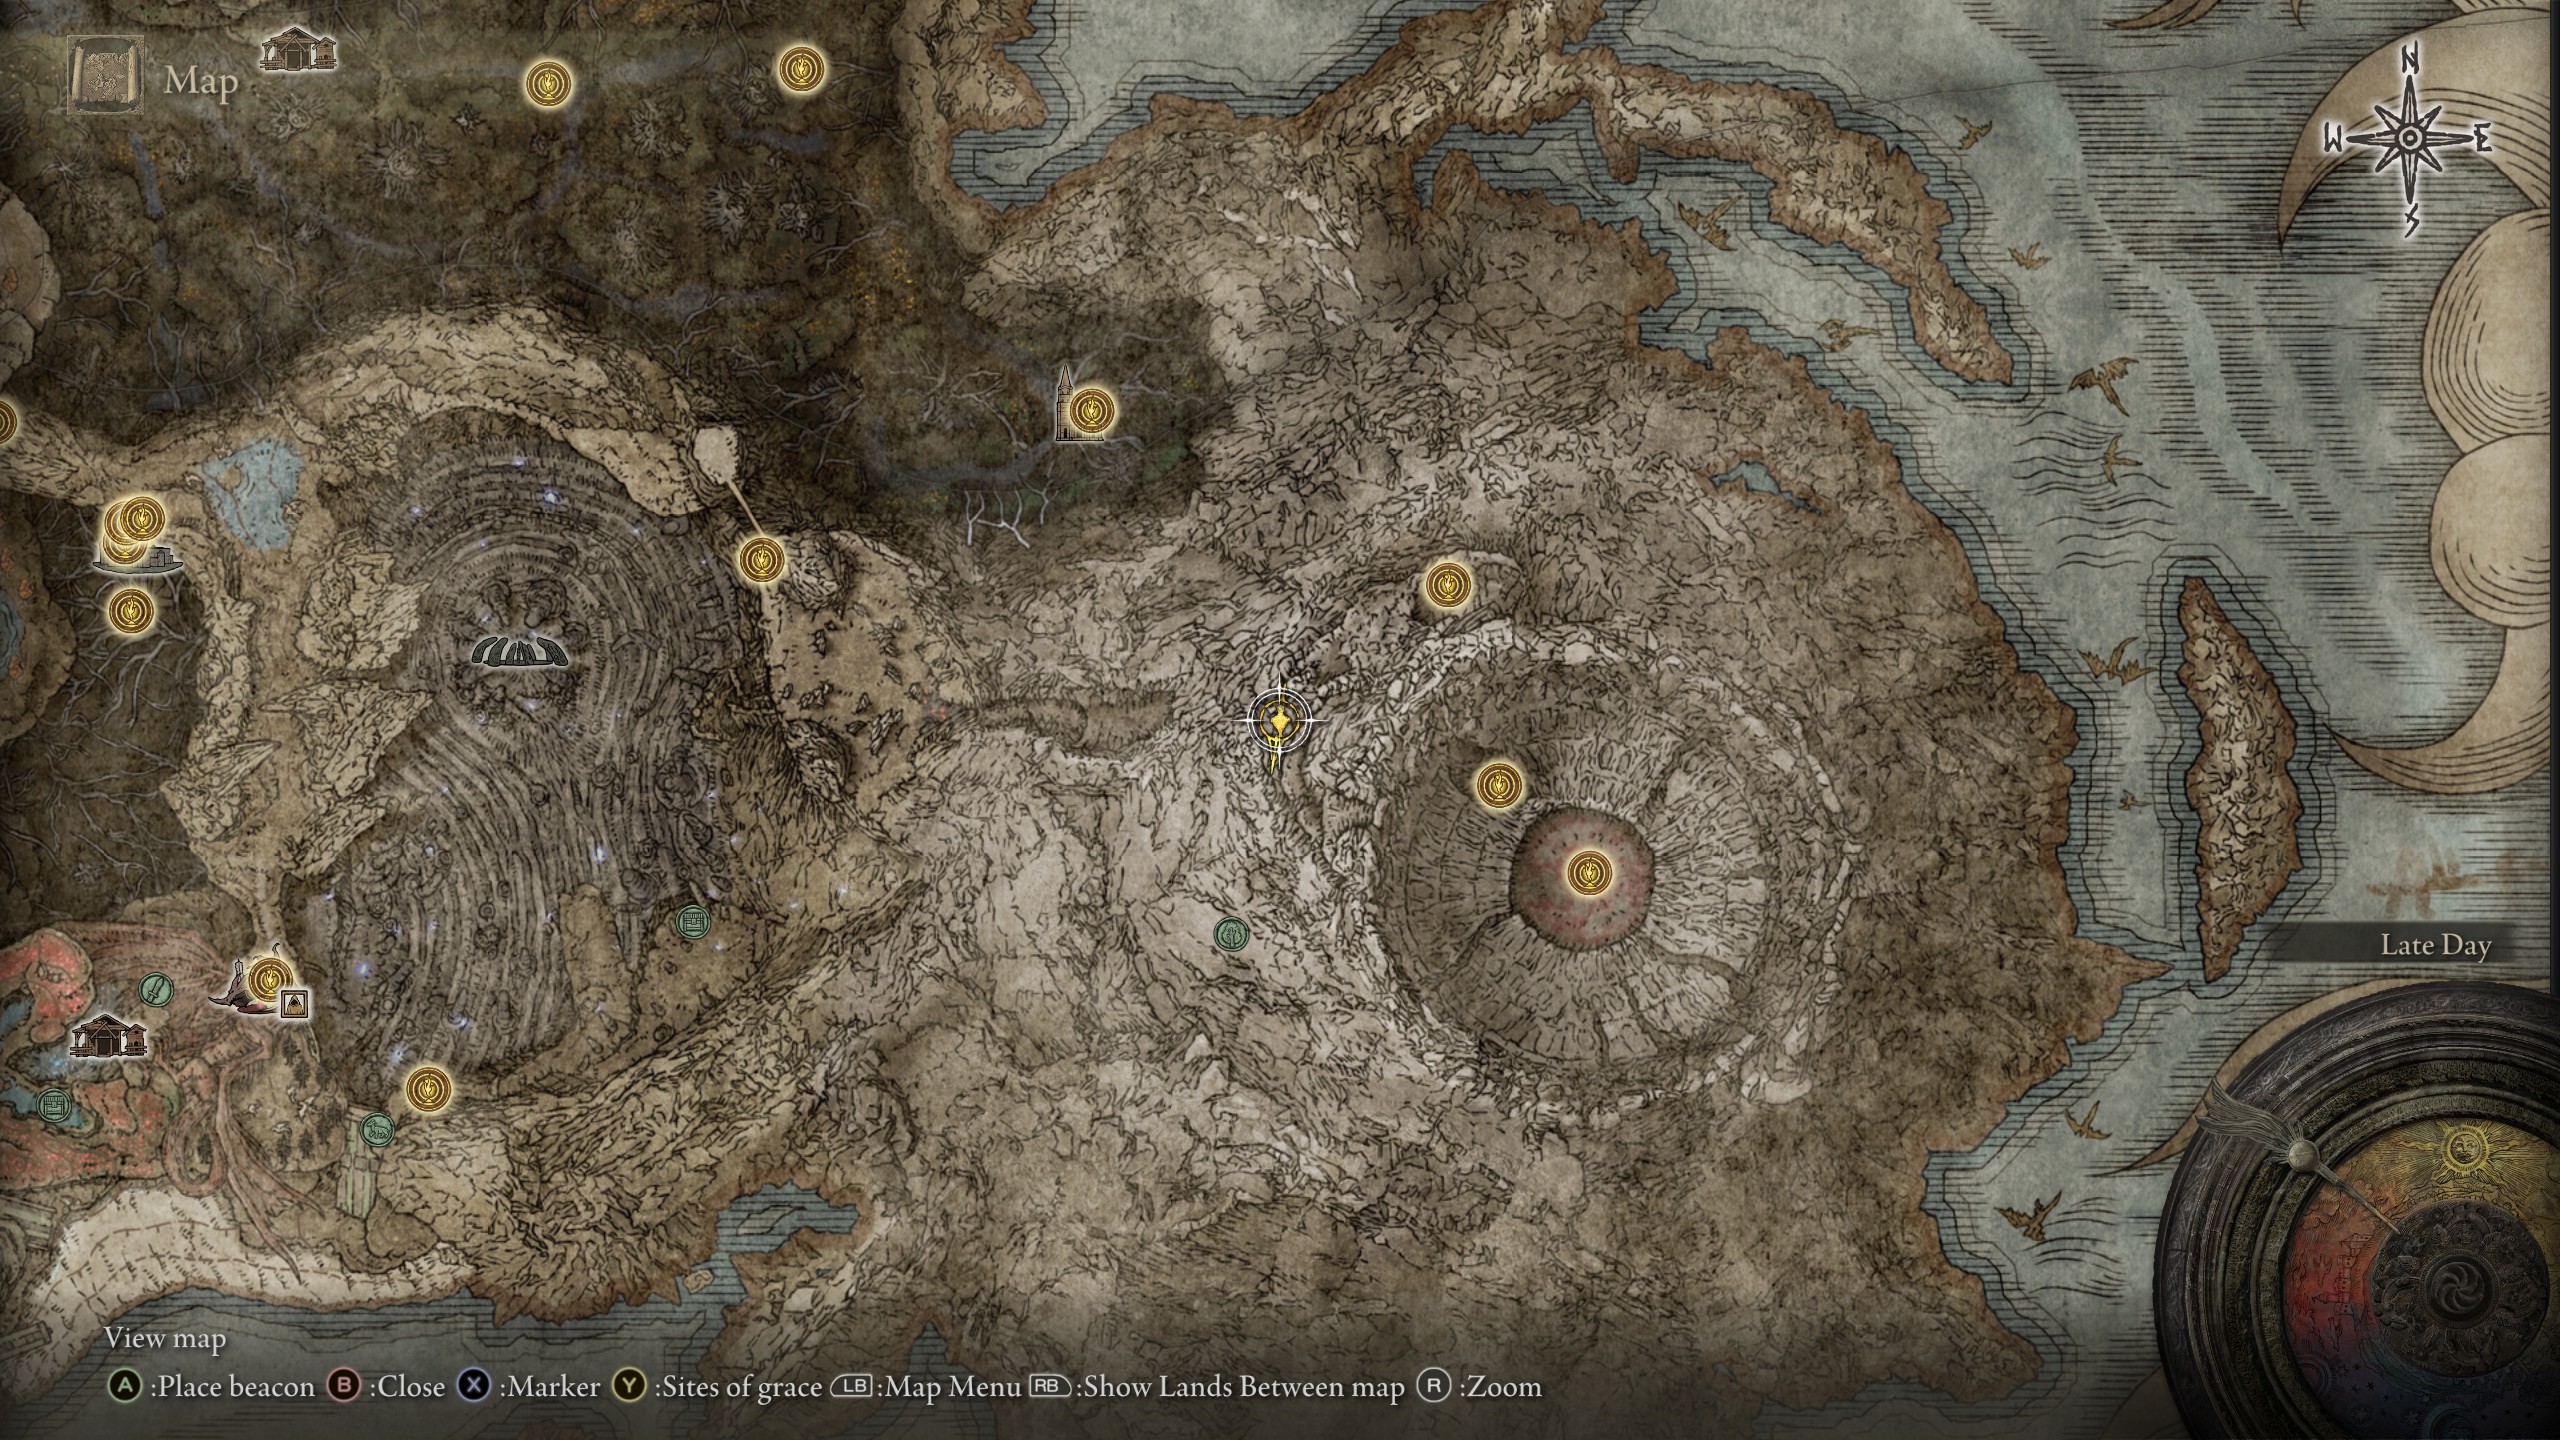 Elden Ring painting locations - Domain of Dragon's painter